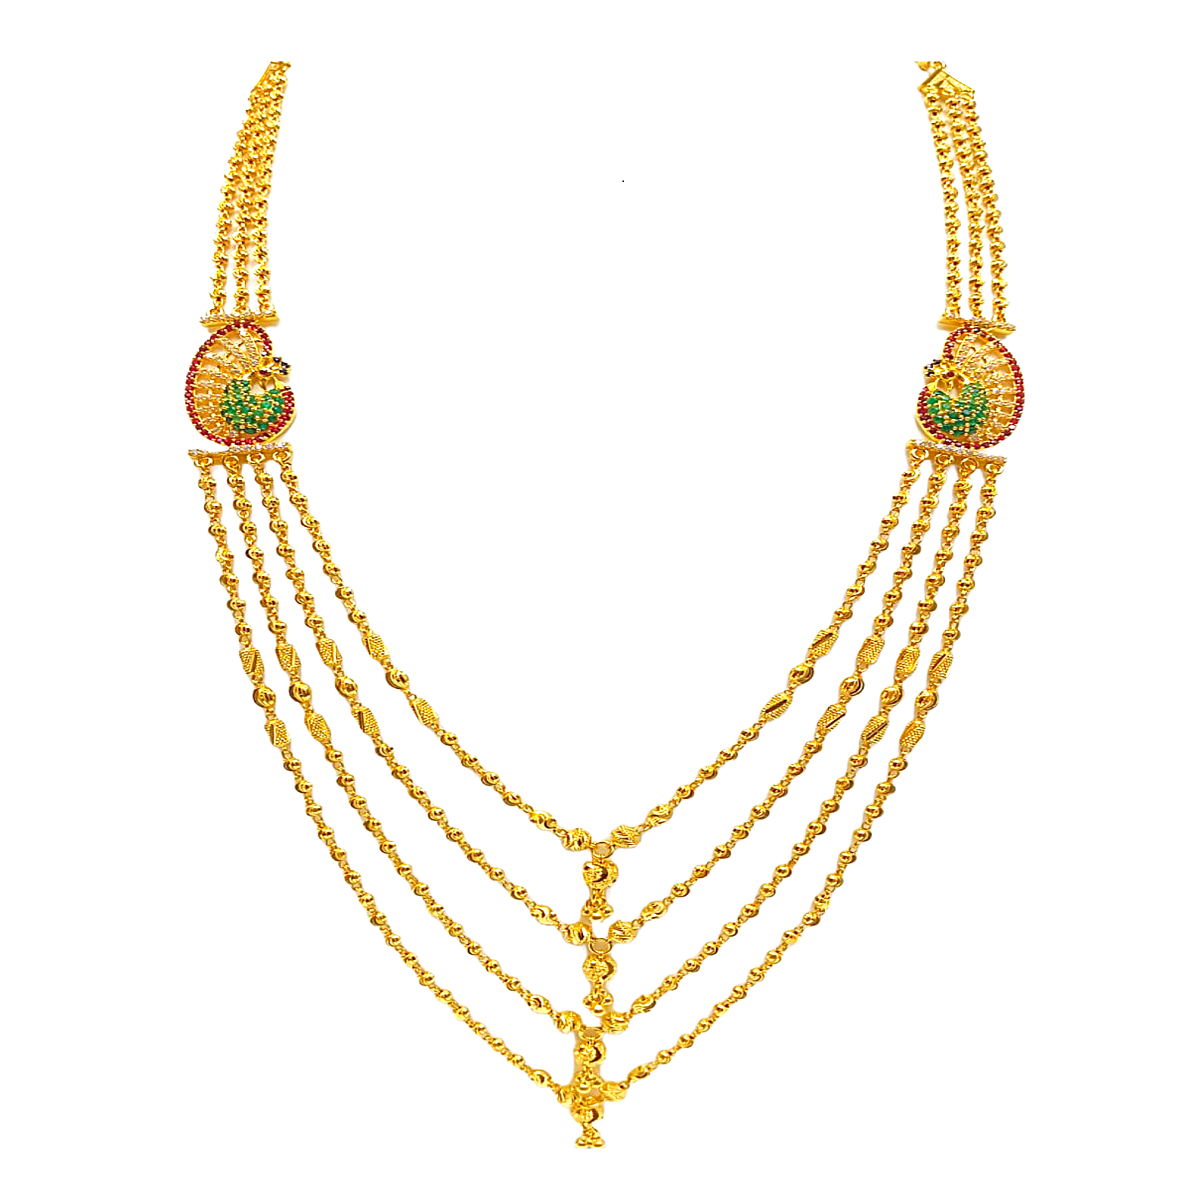 Regal Radiance gold chain